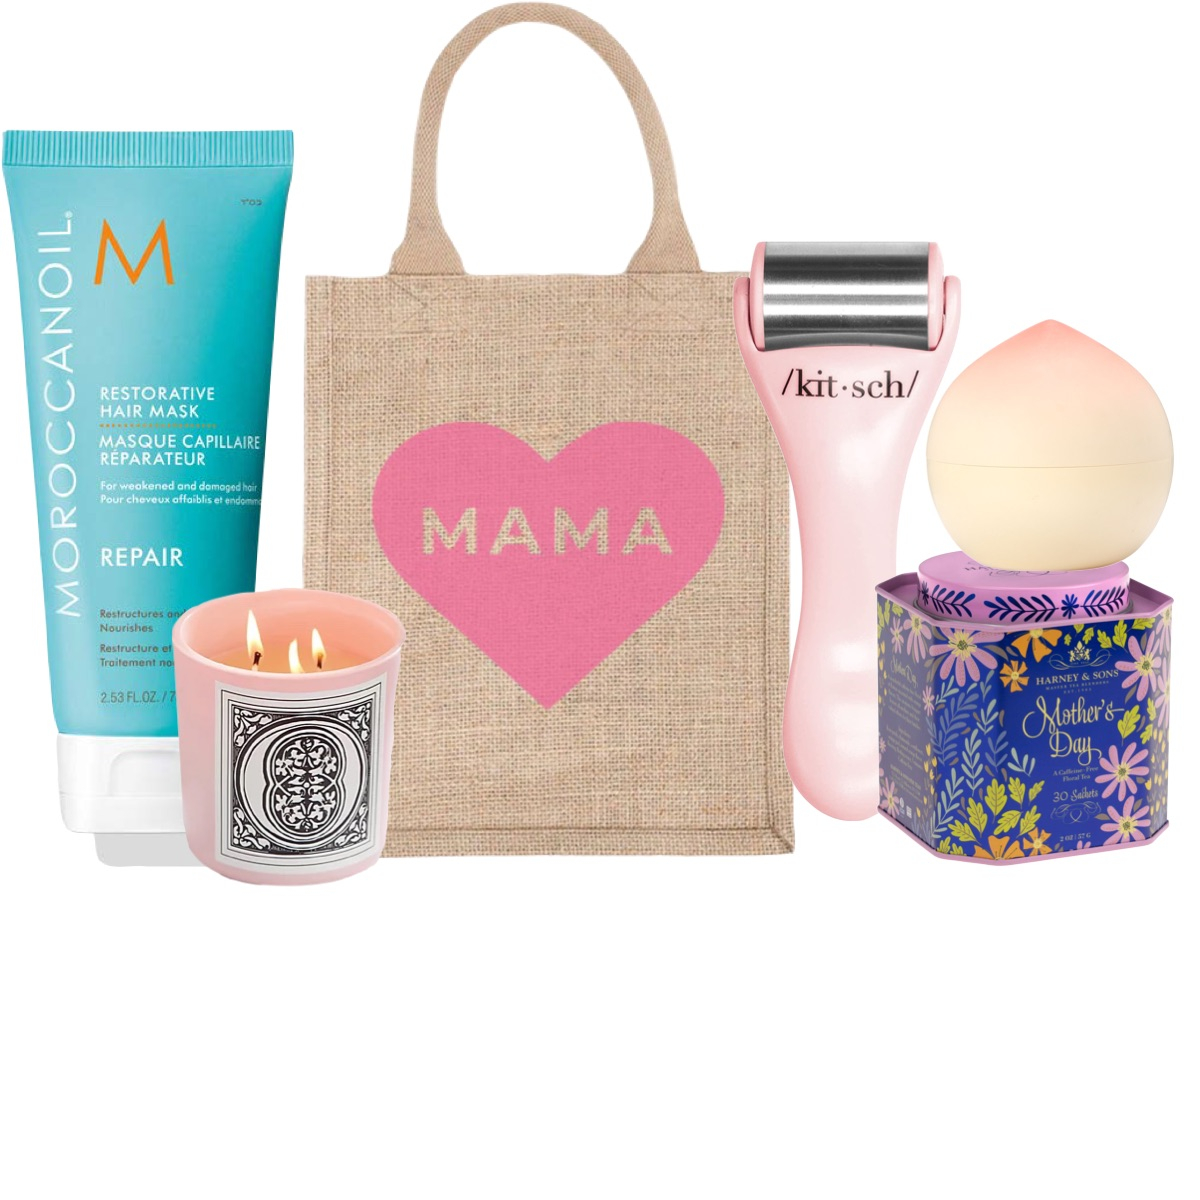 20 Cheap Mother's Day Gifts for $25 or Less That Mom Will Love